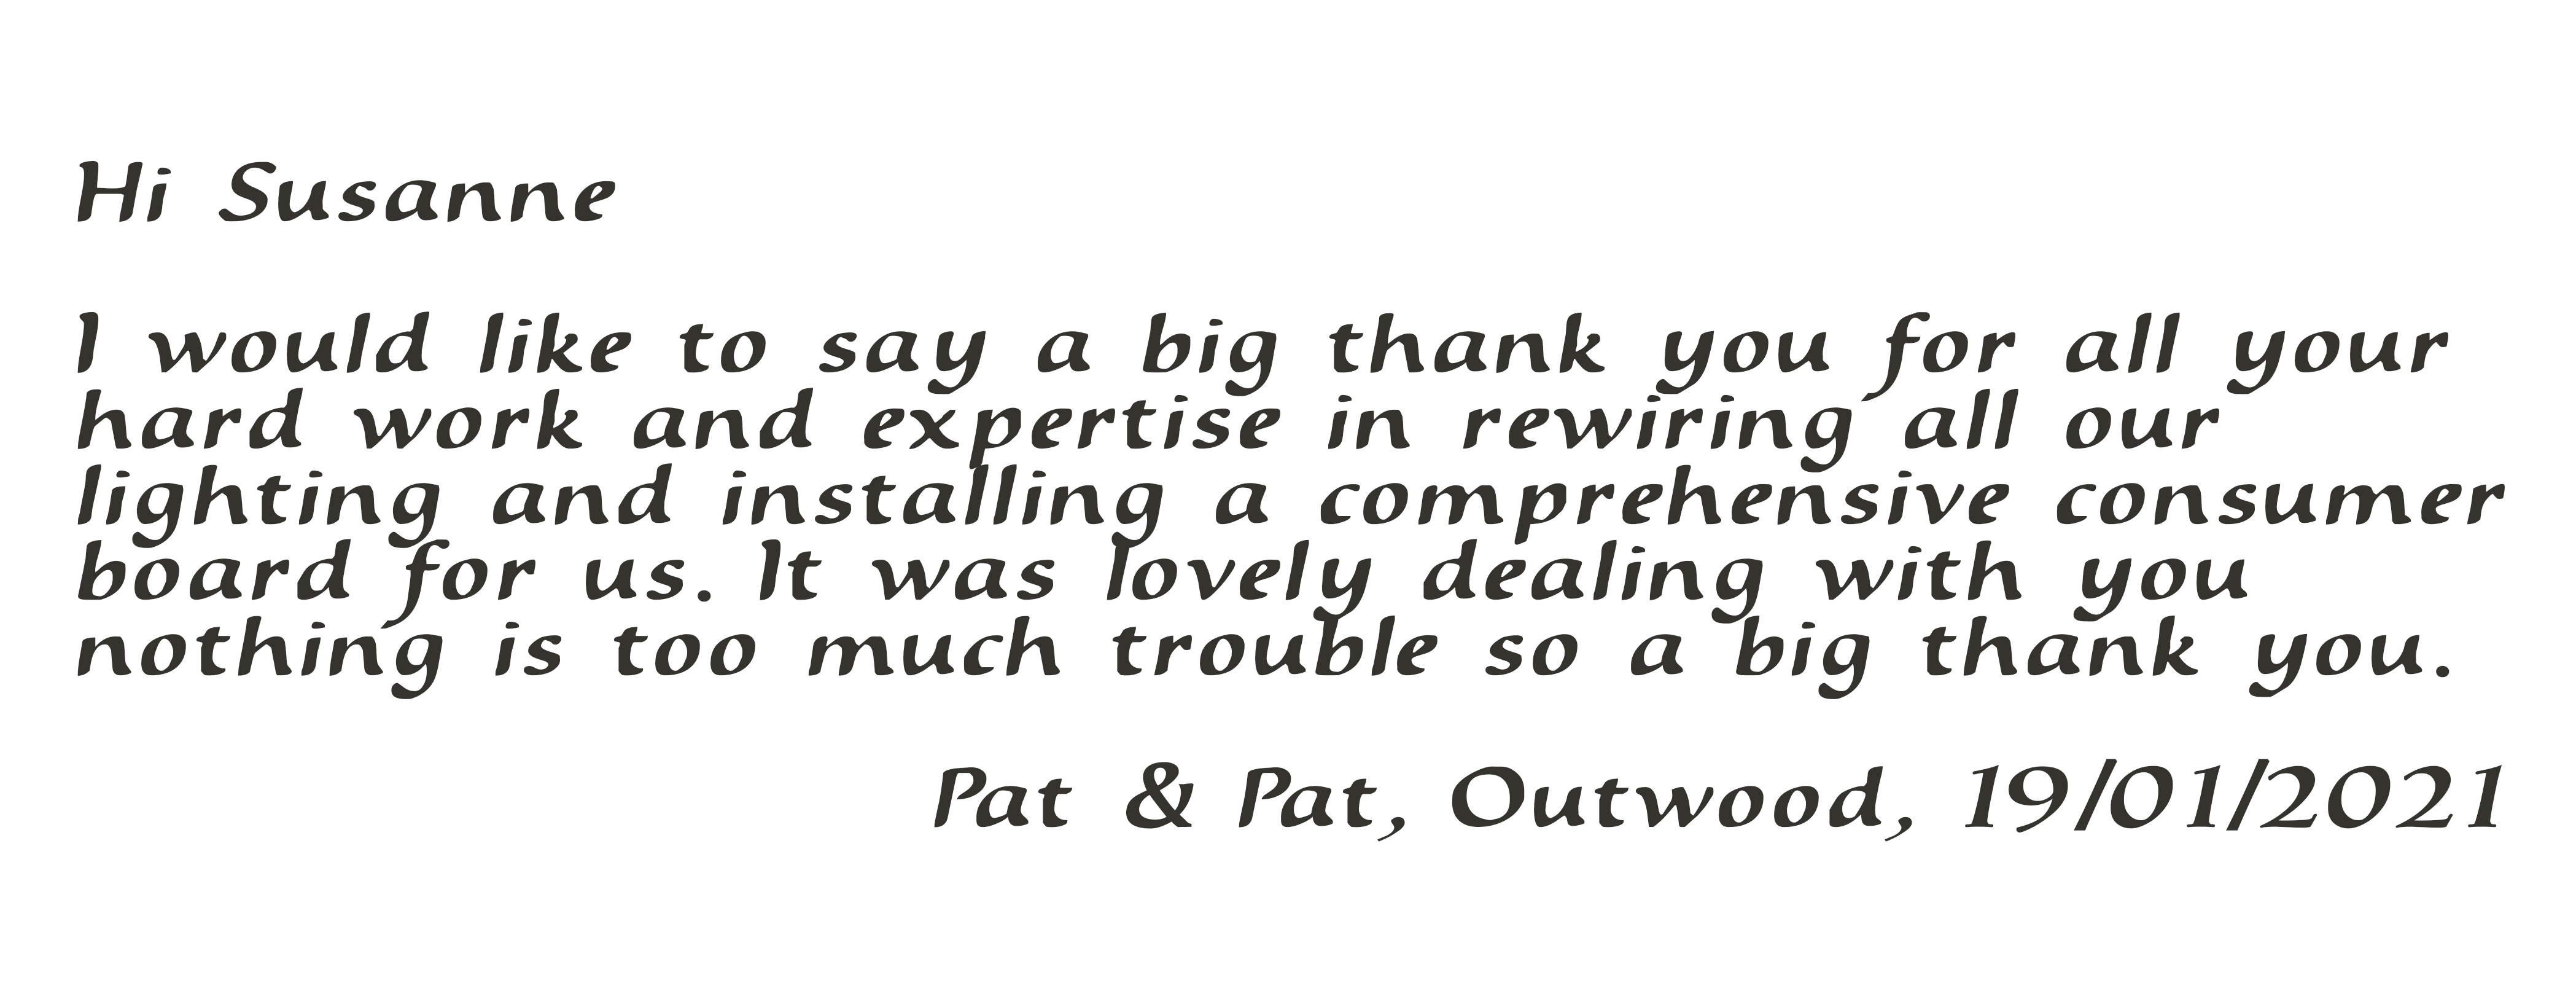 Hi Susanne, I would like to say a big thank you for all your hard work and expertise in rewiring all our lighting and installing a comprehensive consumer board for us. It was lovely dealing with you nothing is too much trouble so a big thank you. Pat & Pat, Outwood, 19/01/2021